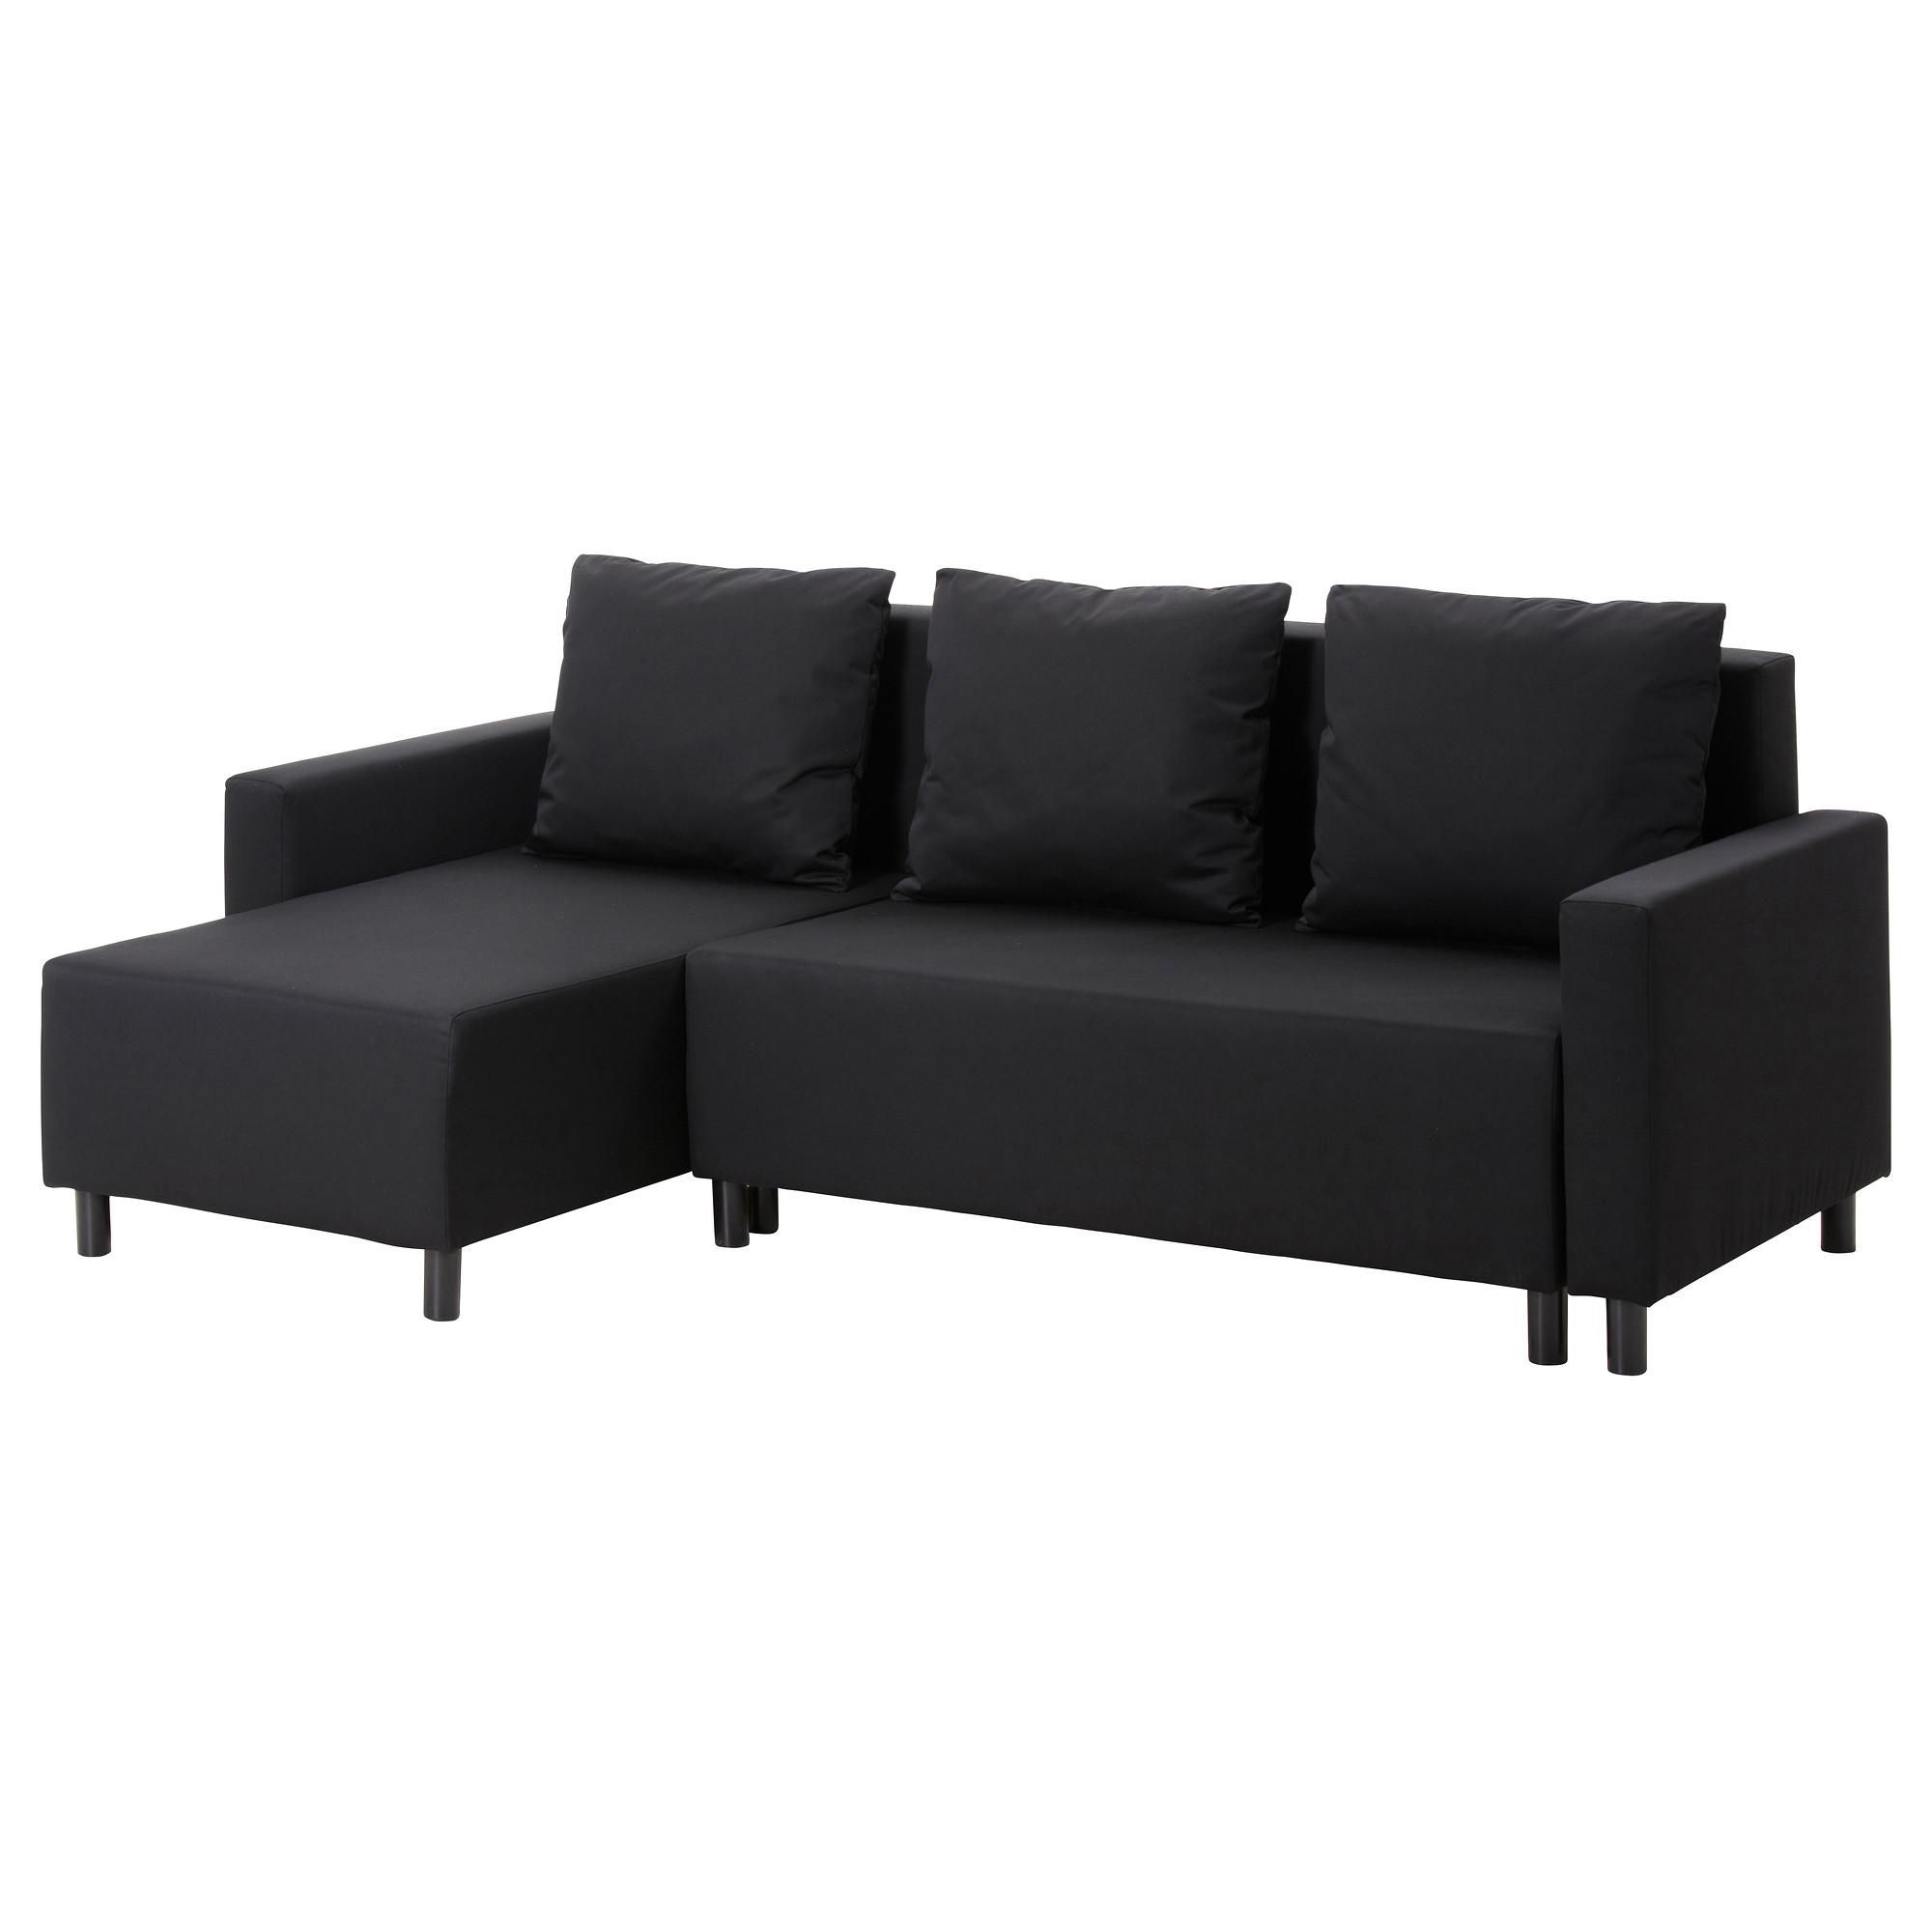 Sleeper Sofas & Chair Beds – Ikea With Regard To Manstad Sofa Bed With Storage From Ikea (View 20 of 20)